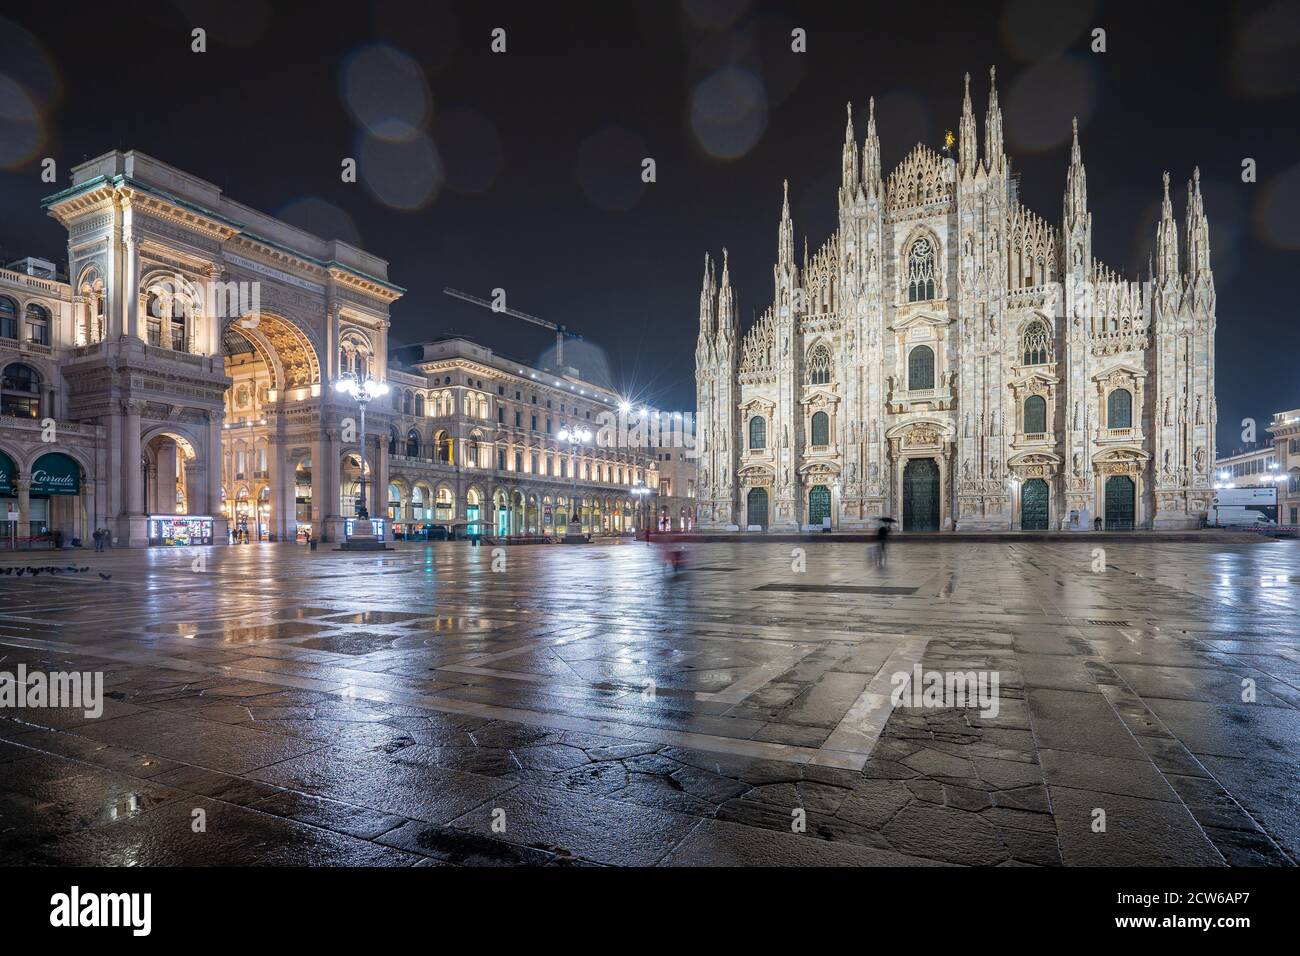 Rainy day with view of Duomo in Milan, Italy. Stock Photo